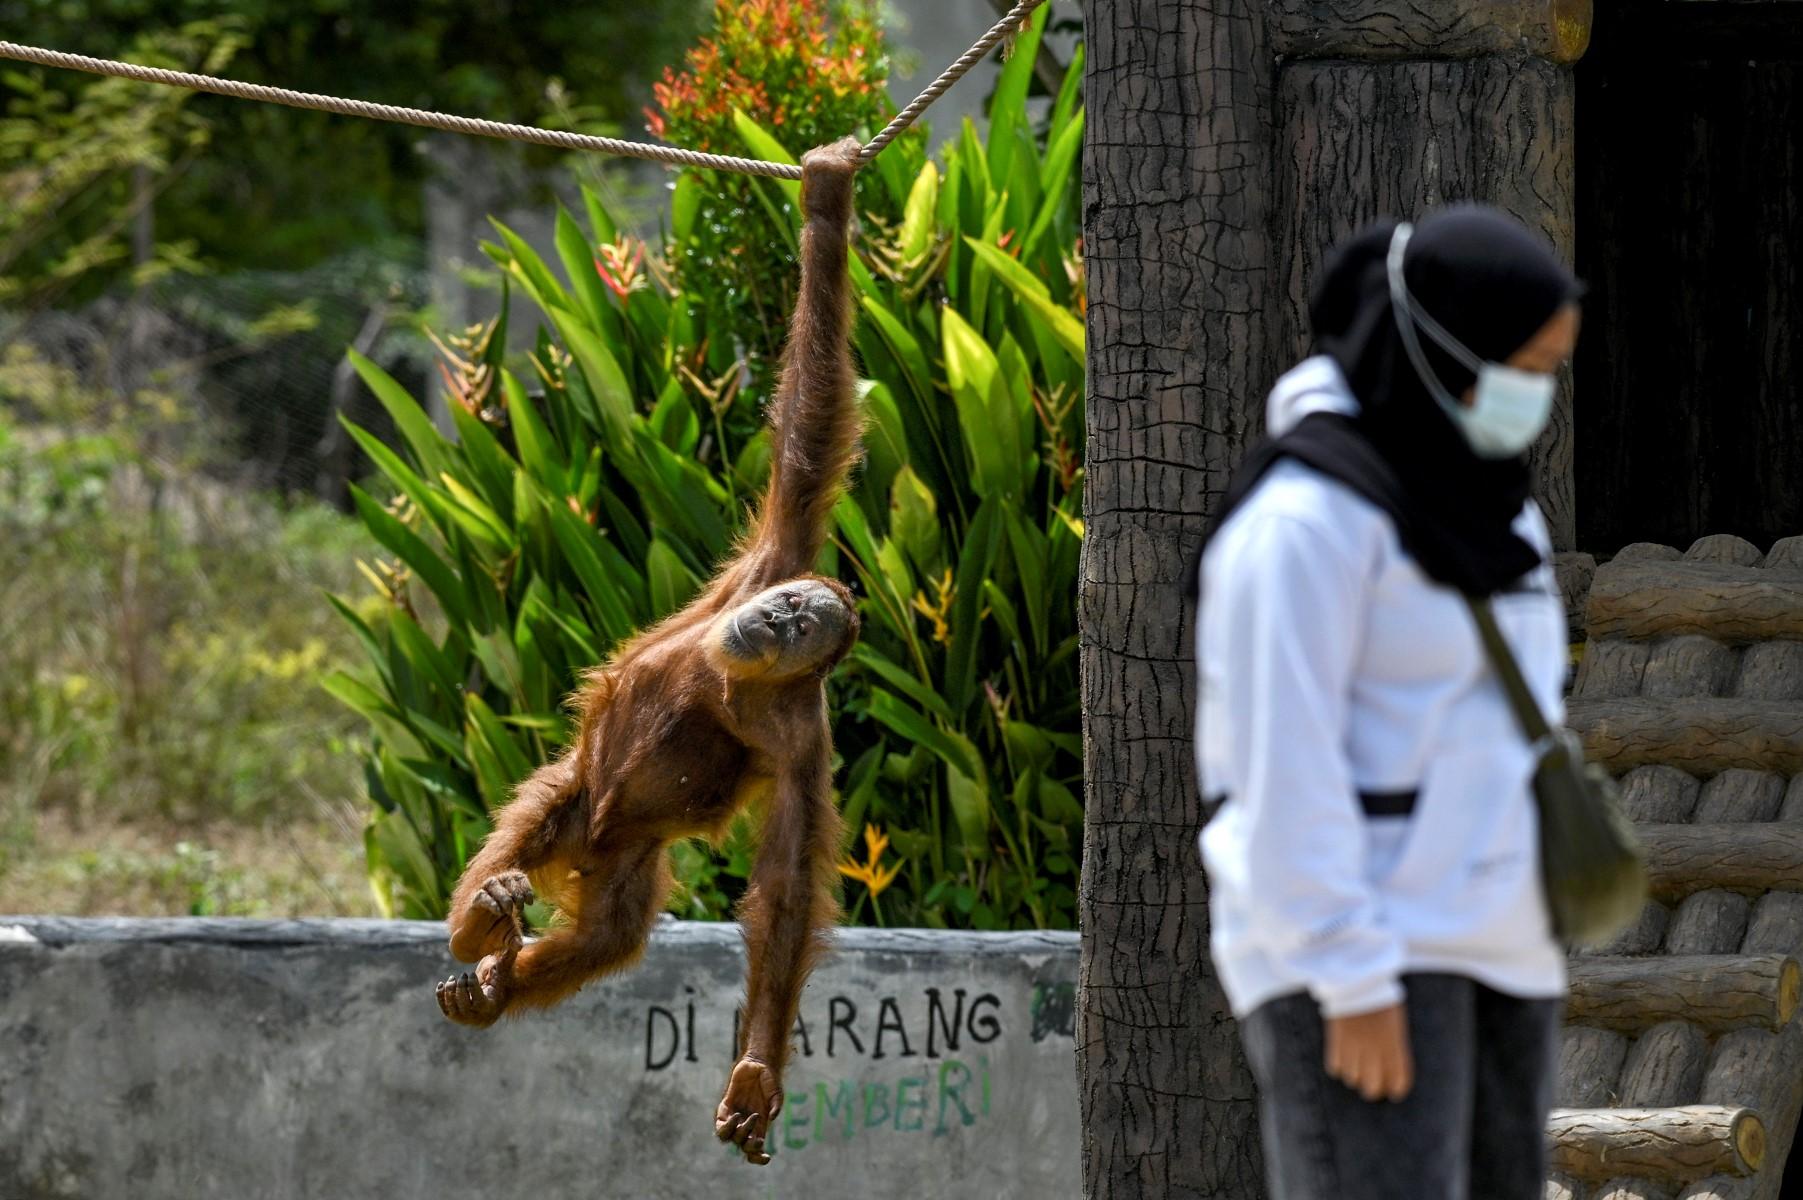 A Sumatran orangutan swings on a rope near a visitor at the safari park and zoo in Jantho, Aceh province on Oct 10, 2021. Photo: AFP